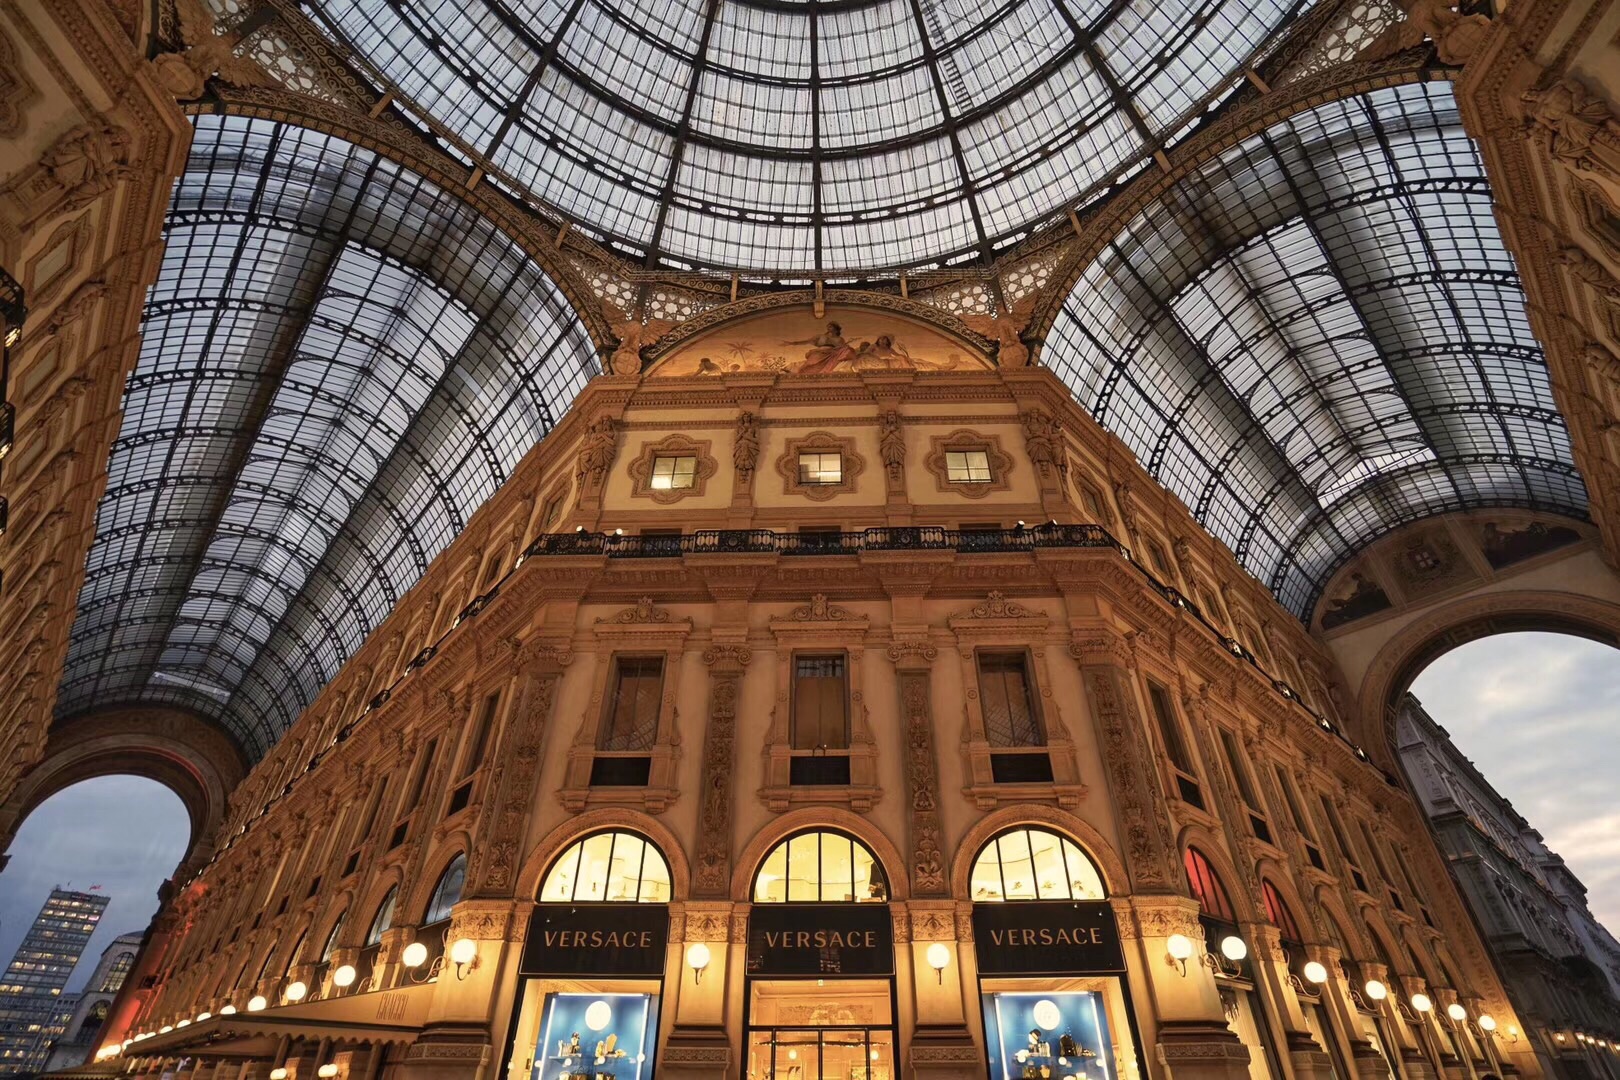 Galleria Vittorio Emanuele II attraction reviews - Galleria Vittorio  Emanuele II tickets - Galleria Vittorio Emanuele II discounts - Galleria  Vittorio Emanuele II transportation, address, opening hours - attractions,  hotels, and food